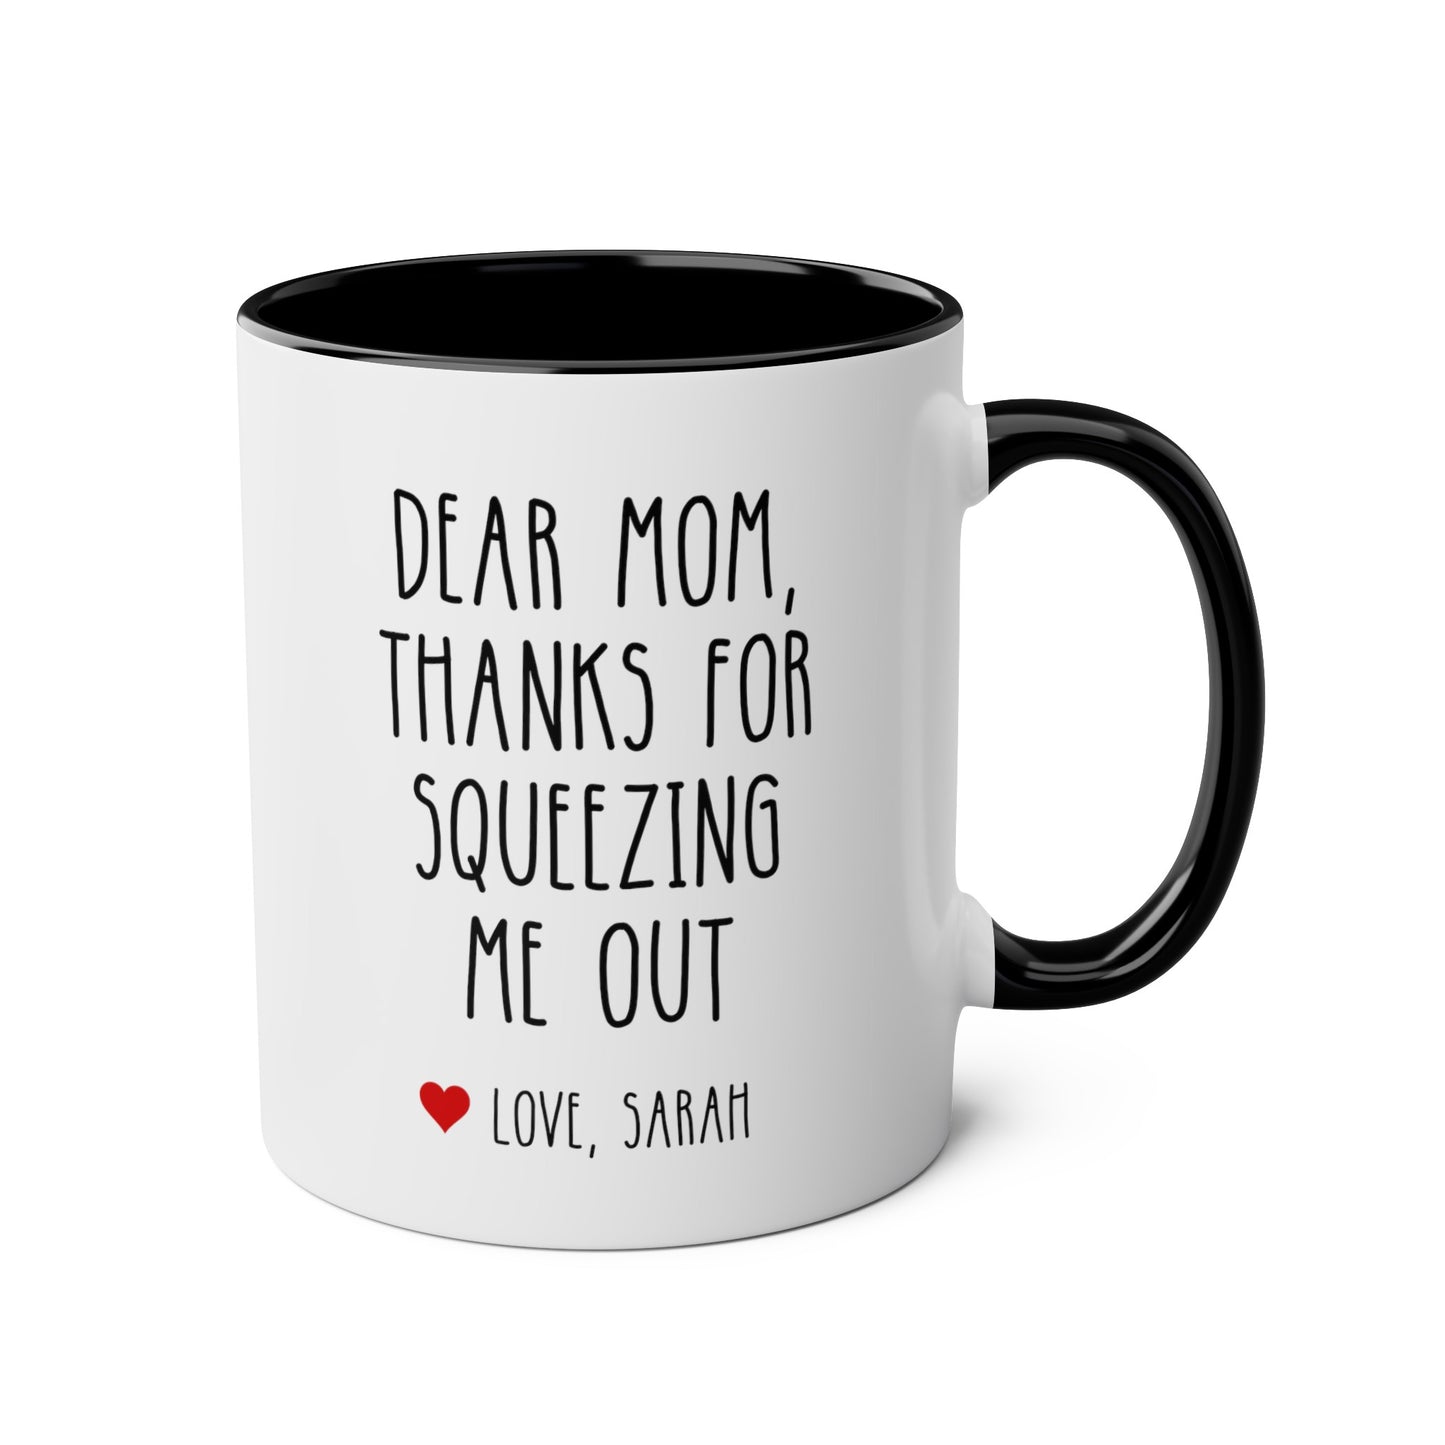 Dear Mom Thanks For Squeezing Me Out 11oz white with black accent funny large coffee mug gift for mother's day custom name personalize love novelty birthday appreciation gag waveywares wavey wares wavywares wavy wares